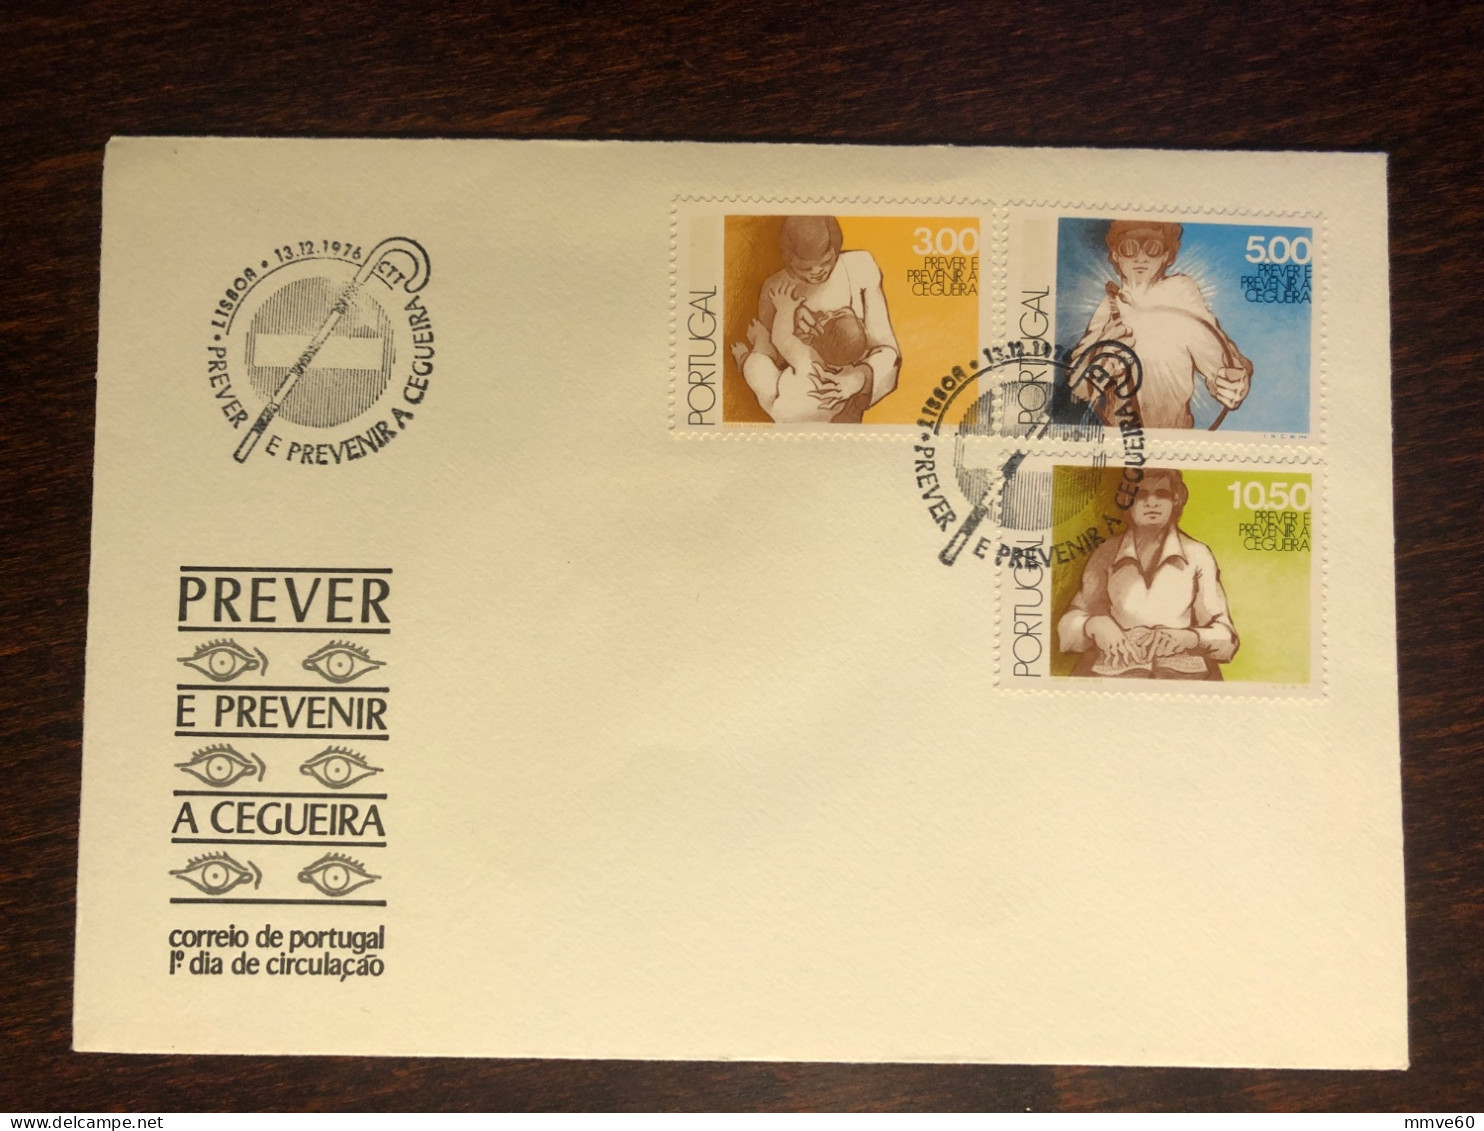 PORTUGAL FDC COVER 1976 YEAR BLINDNESS BLIND BRAILLE HEALTH MEDICINE STAMPS - FDC